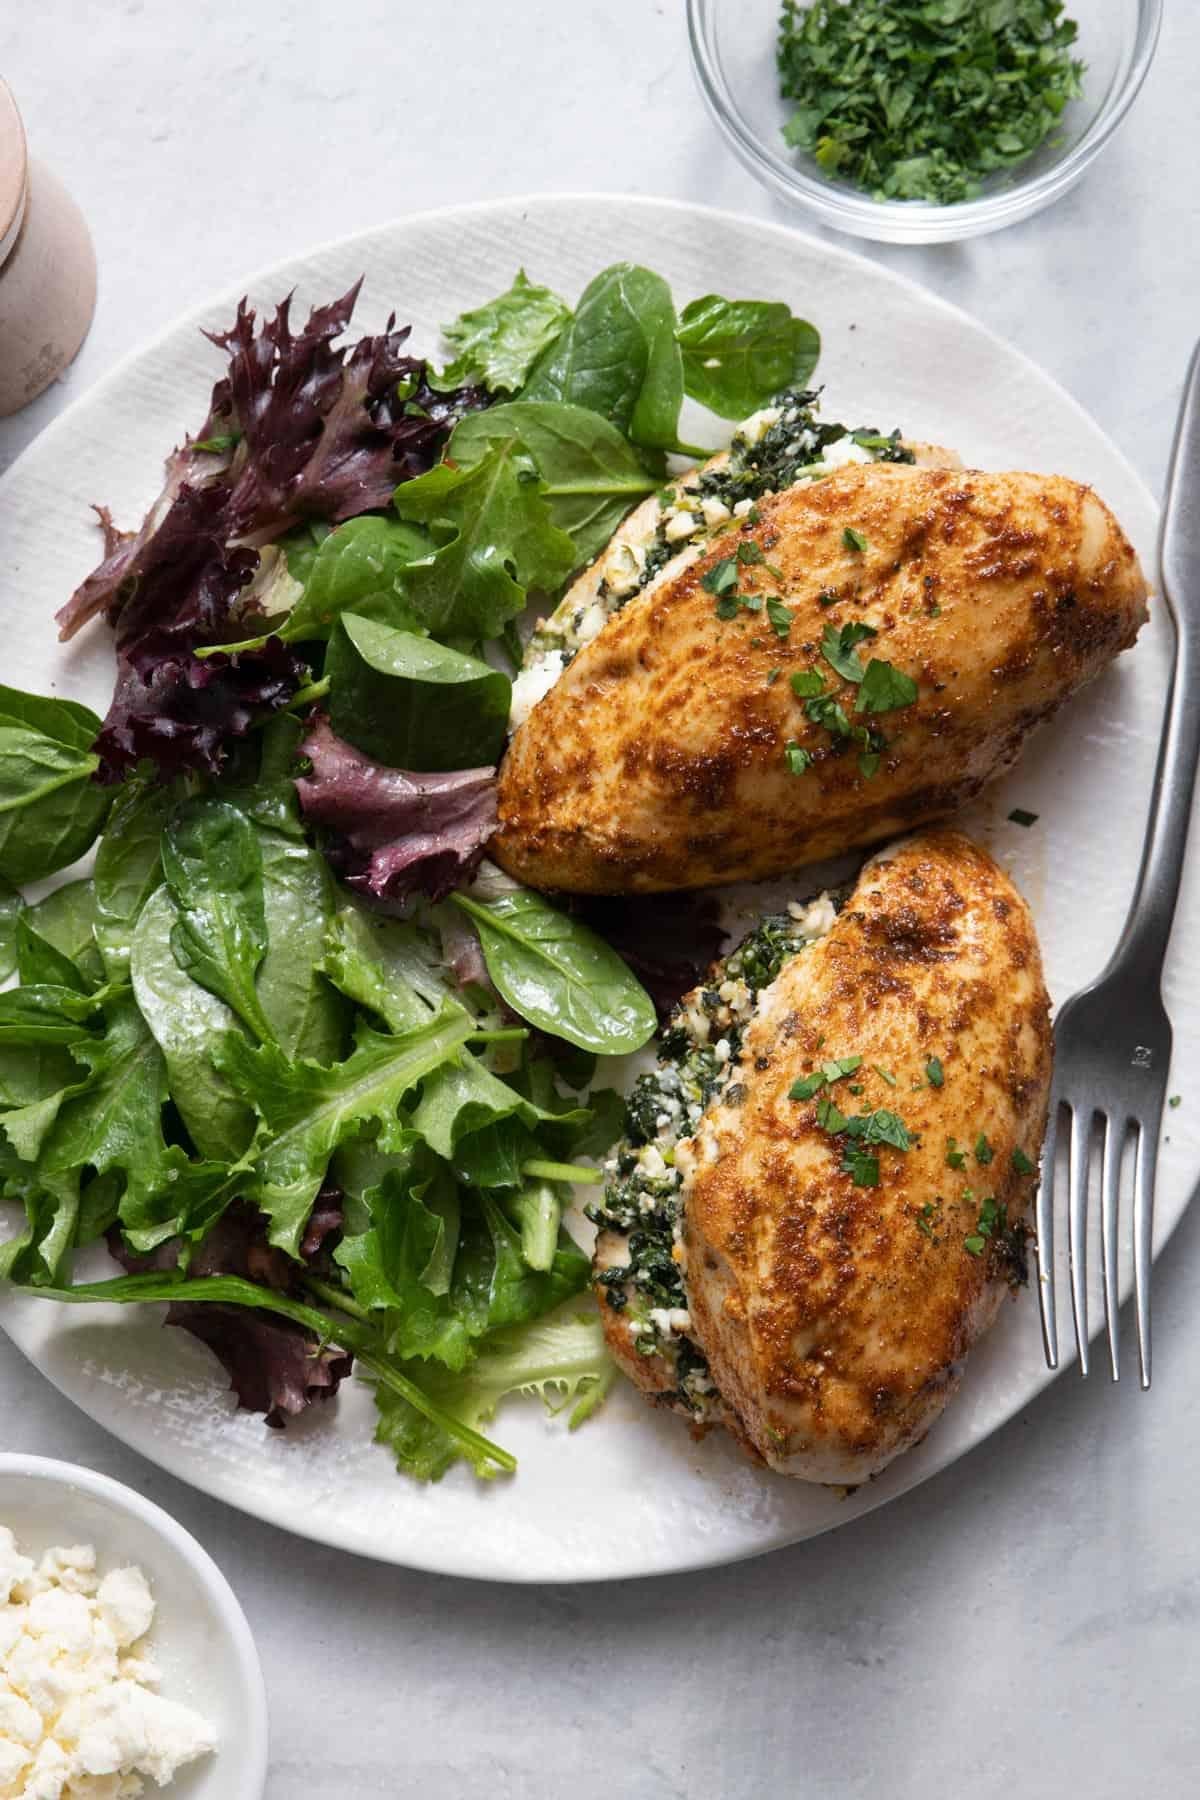 Savory Spinach And Feta Stuffed Chicken Breasts A Delicious And